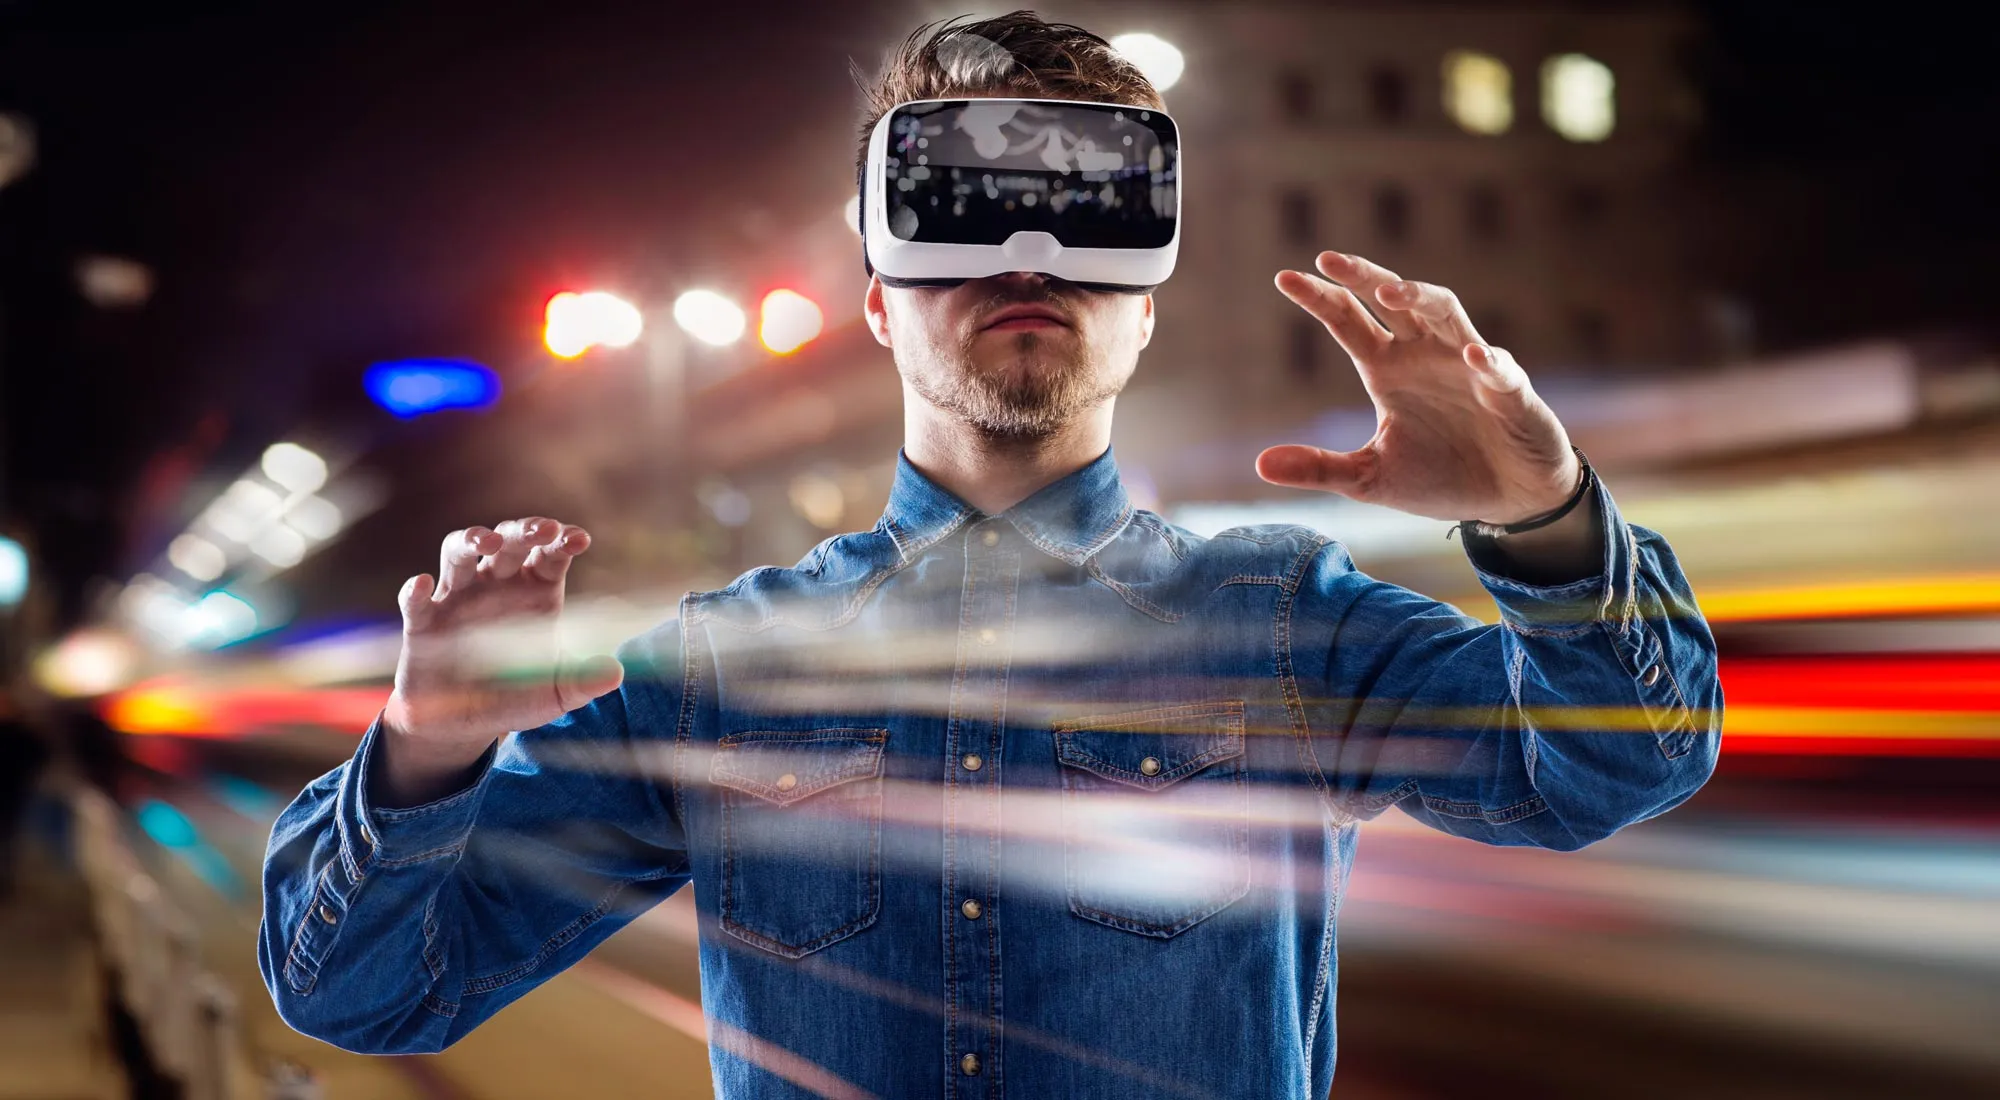 What Does The Pass-Through Functionality Of A Virtual Reality Headset Do